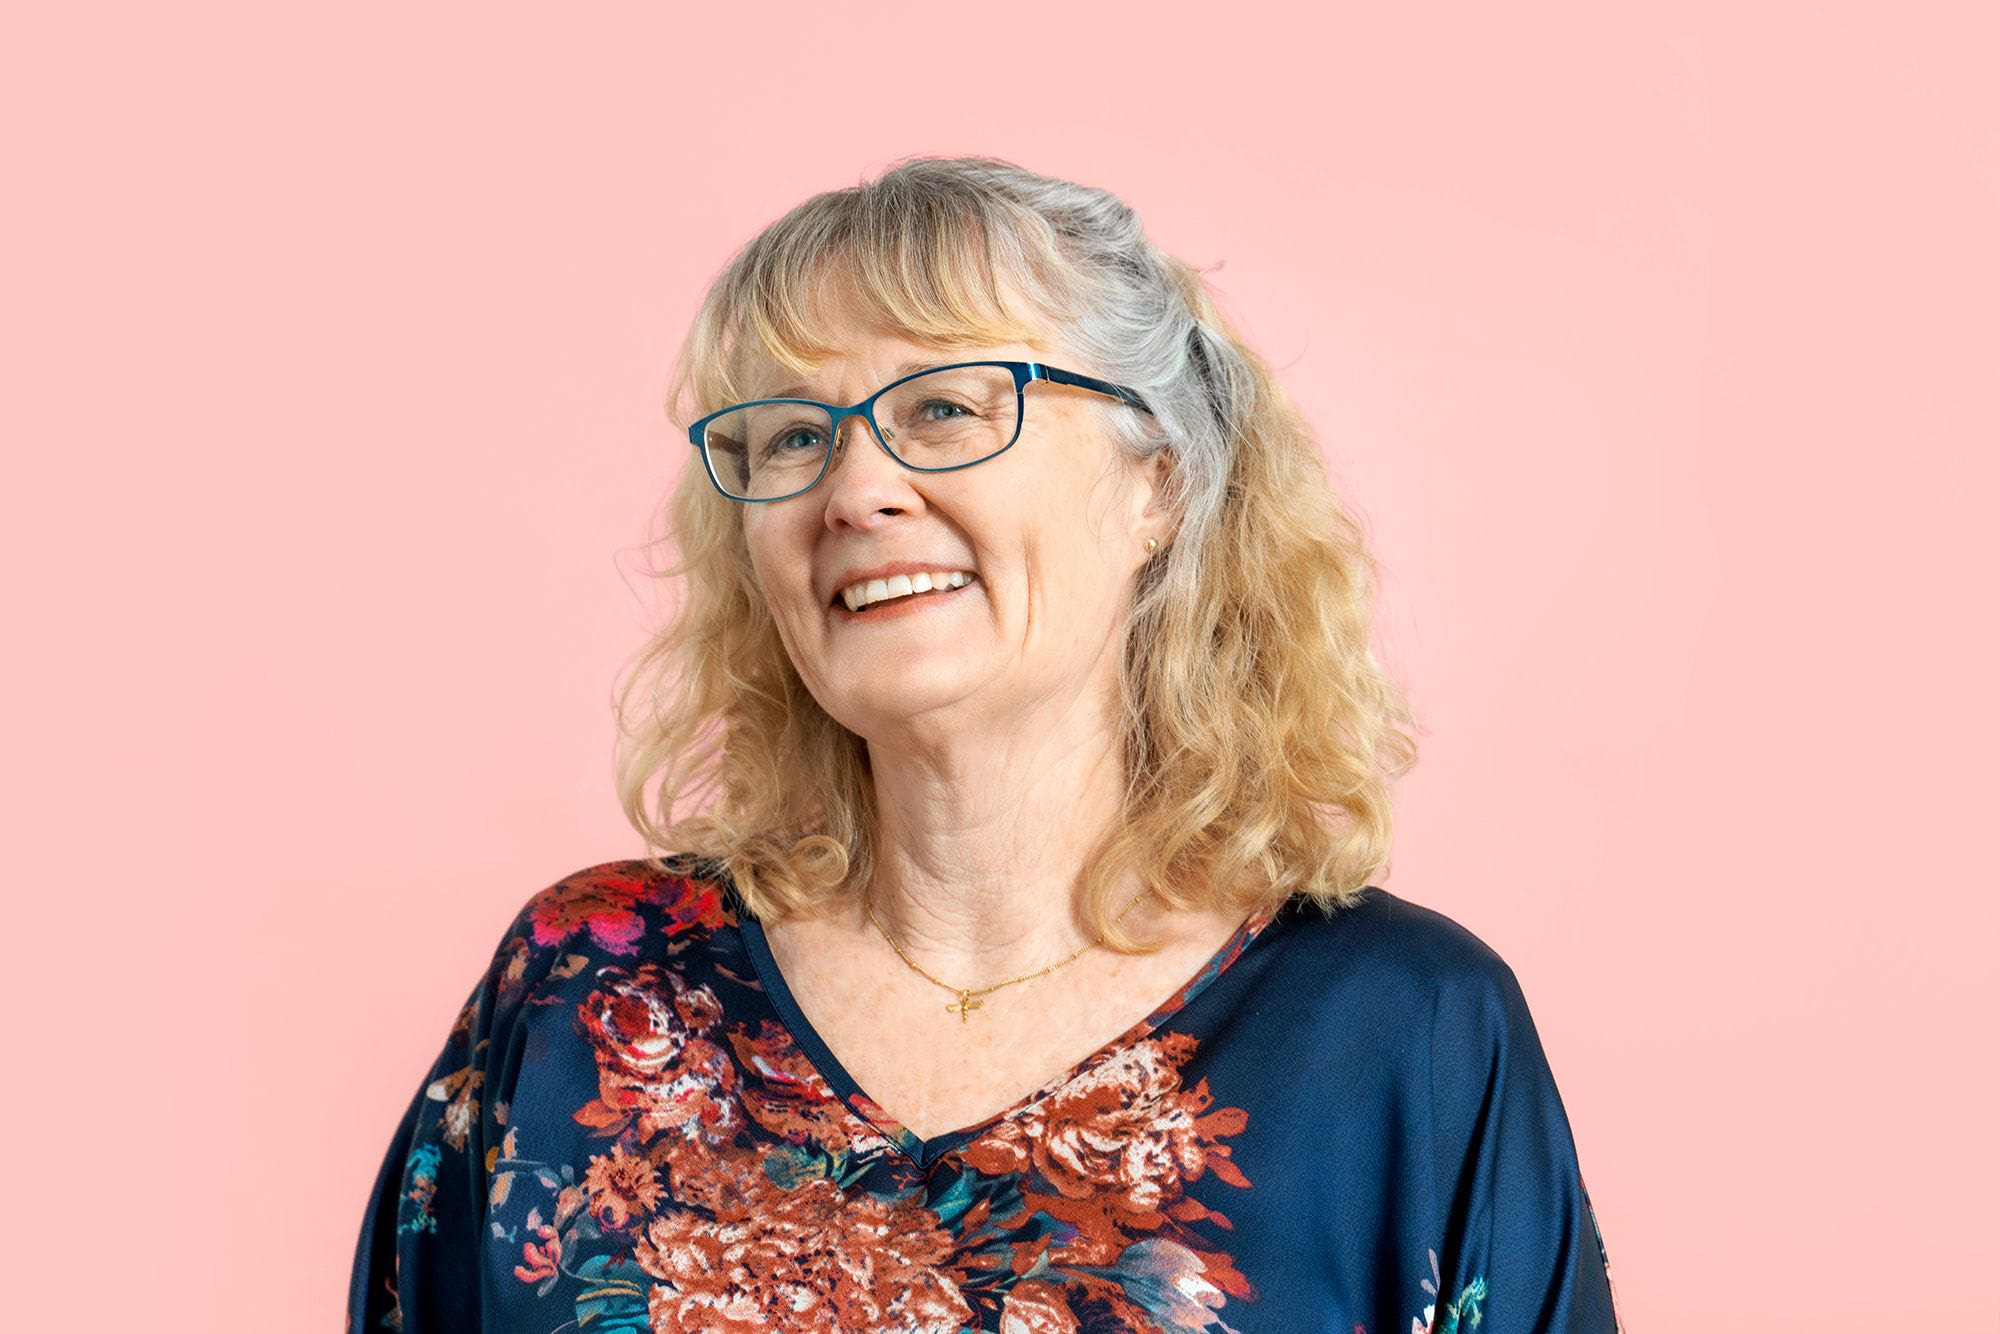 A colour photograph of Tracey, who has shoulder length blonde hair and blue eyes. She wears glasses. She smiles, standing in front of a light pink background.